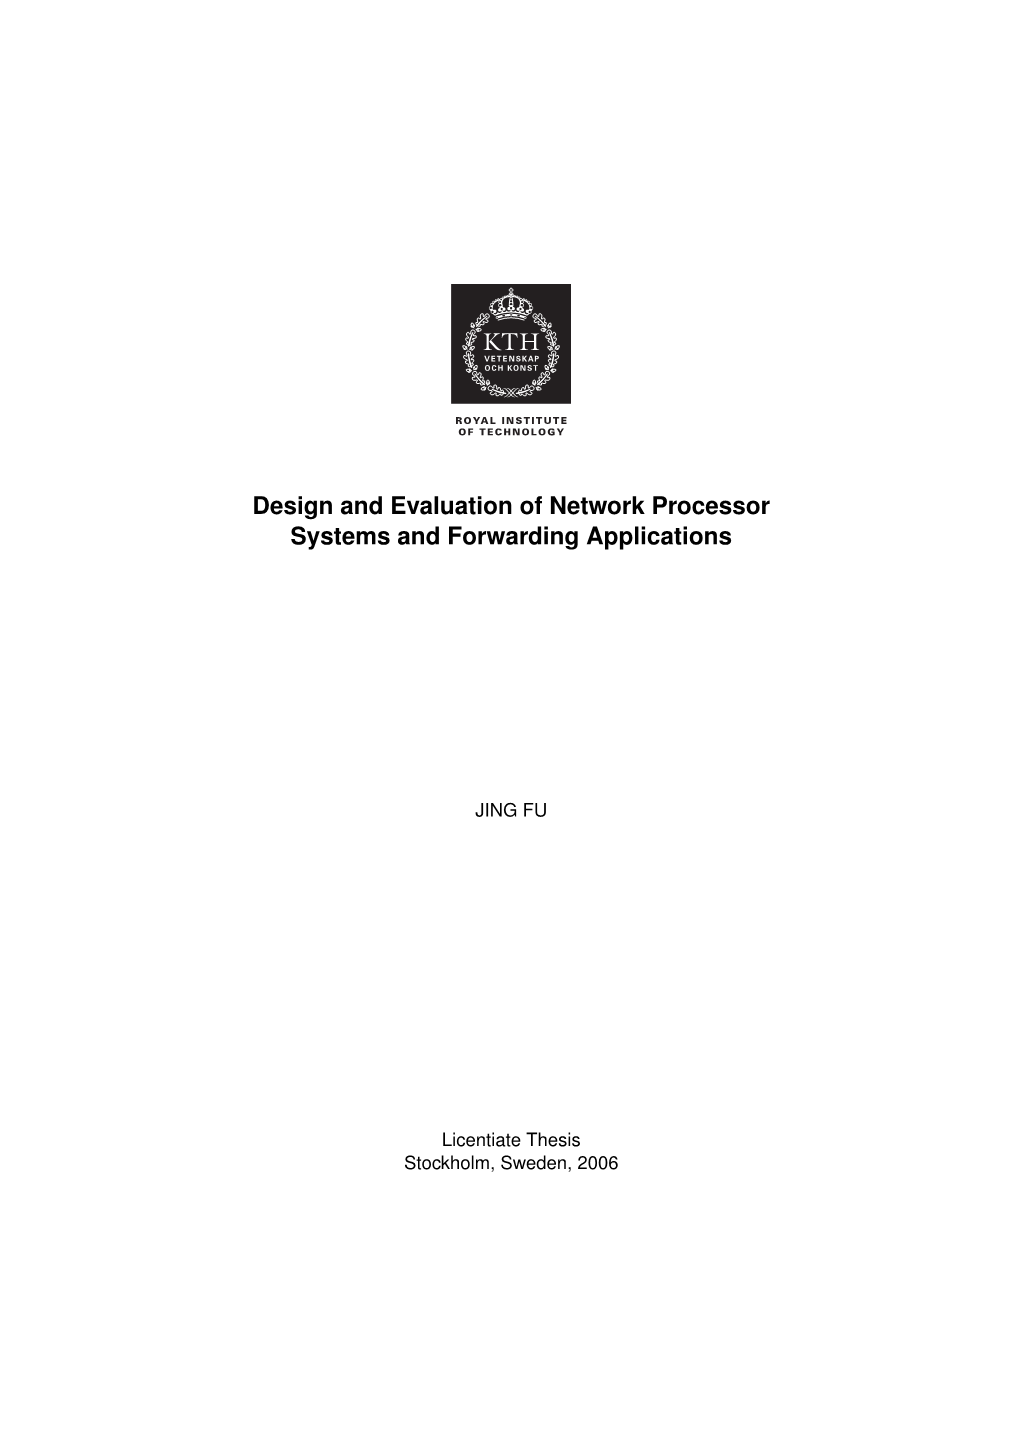 Design and Evaluation of Network Processor Systems and Forwarding Applications